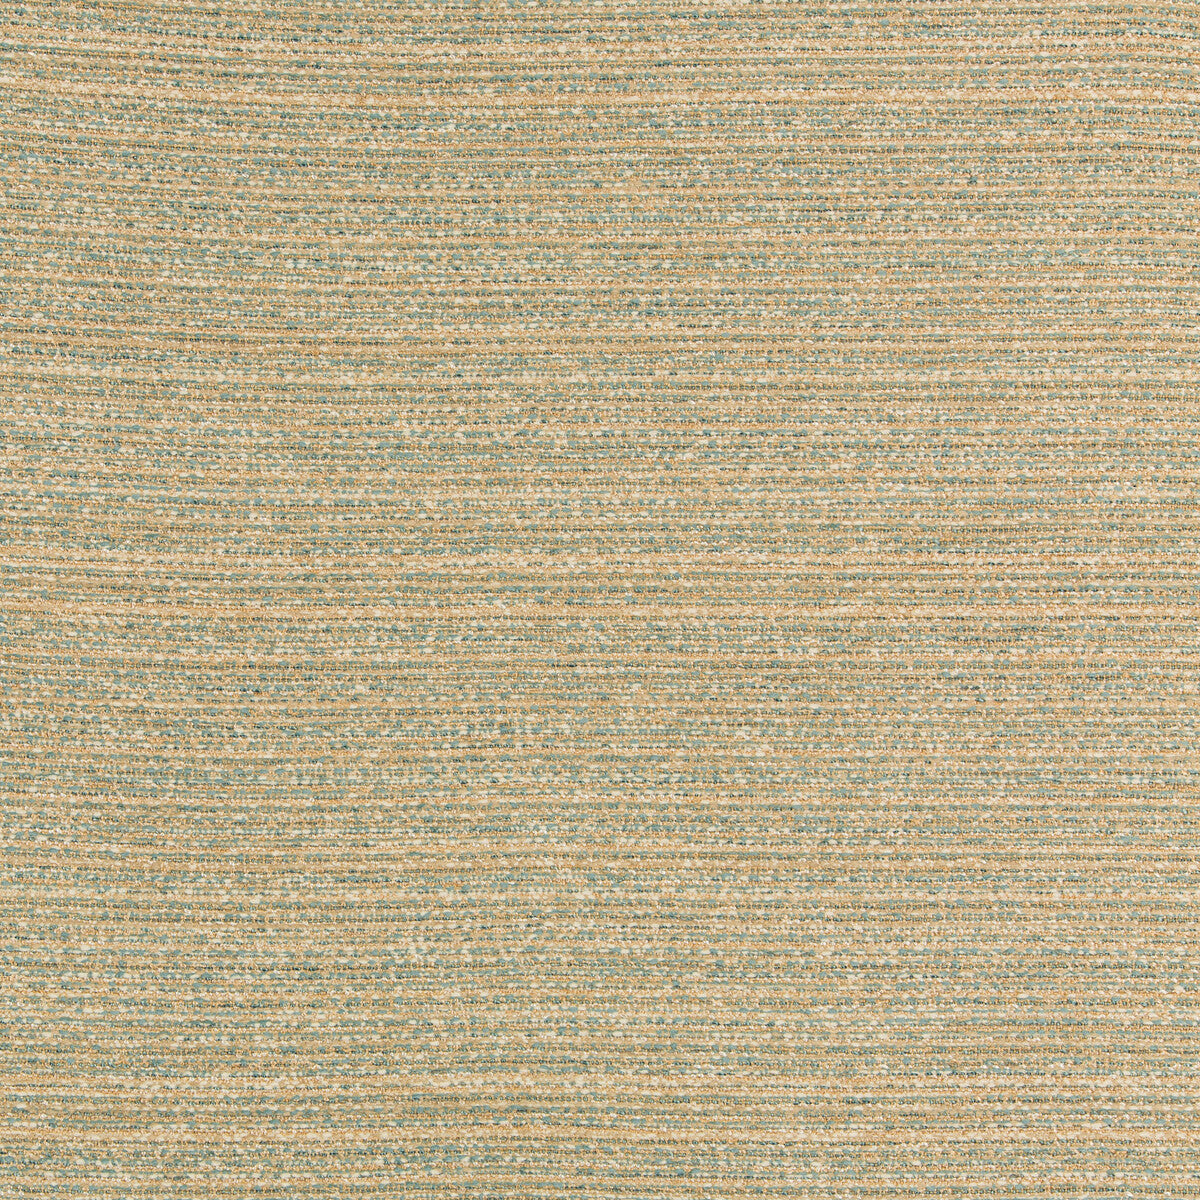 Kravet Design fabric in 36079-113 color - pattern 36079.113.0 - by Kravet Design in the Inside Out Performance Fabrics collection